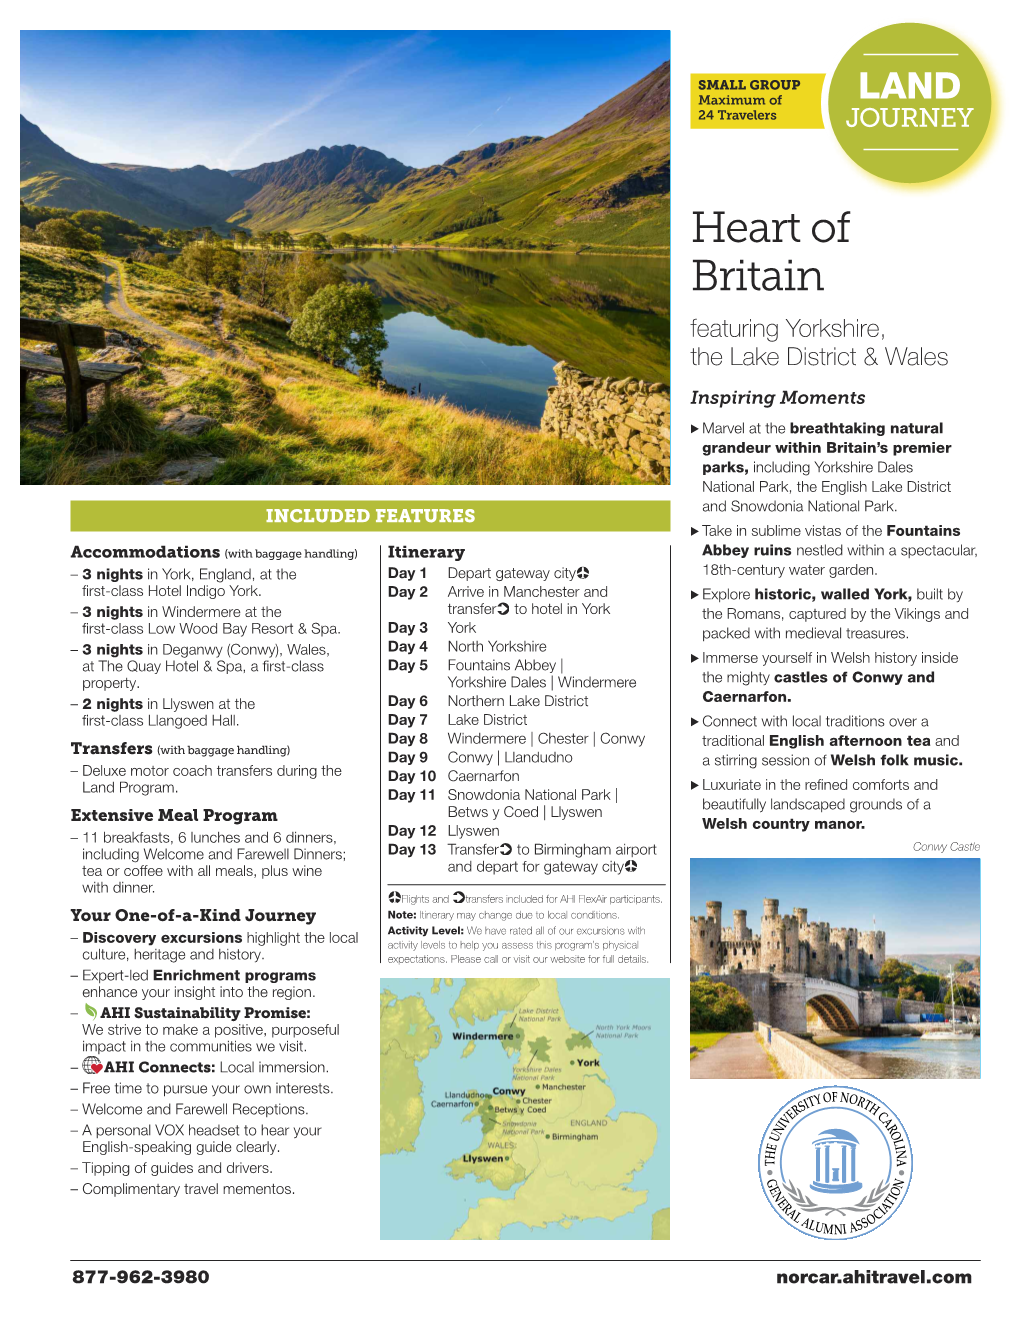 Heart of Britain Featuring Yorkshire, the Lake District & Wales